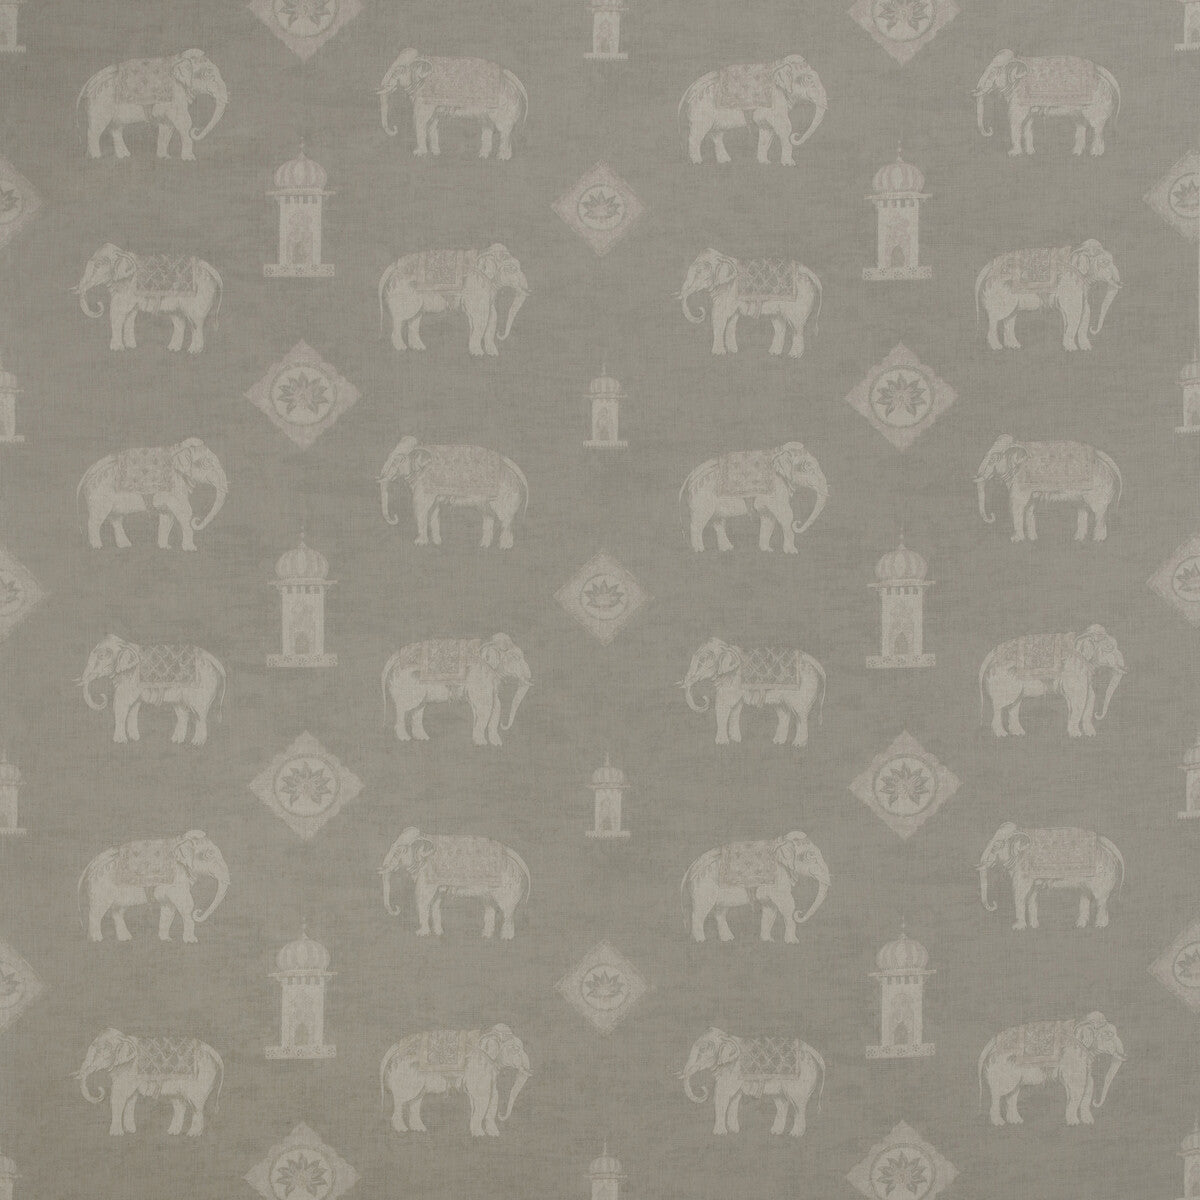 Bolo fabric in stone color - pattern AM100316.11.0 - by Kravet Couture in the Andrew Martin Gobi collection